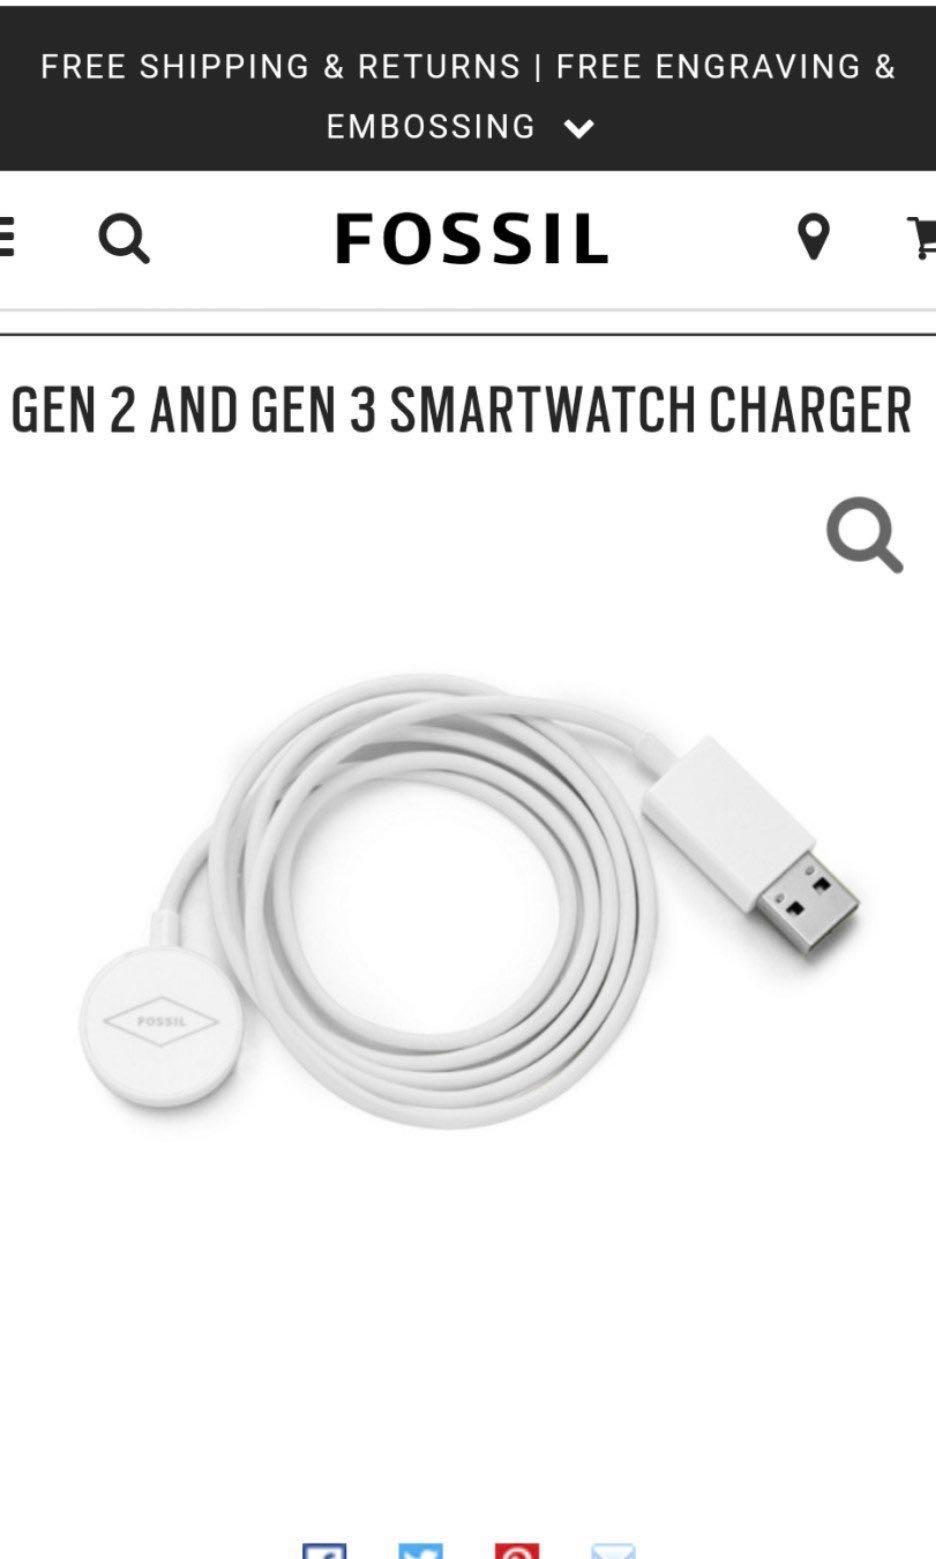 fossil smartwatch gen 2 charger